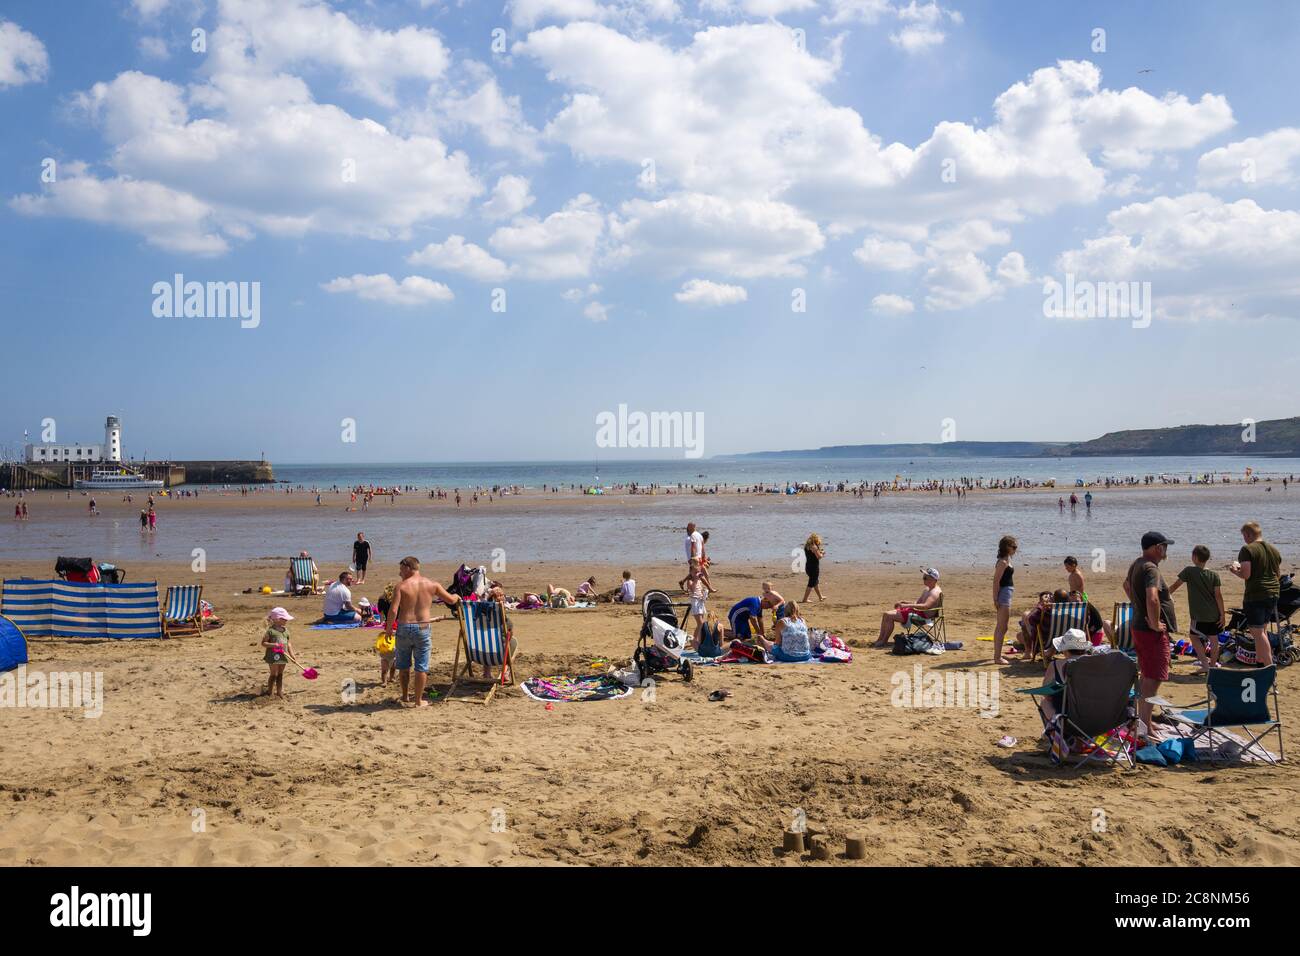 Visitors on a beautiful summer's day at Scarborough beach, North Yorkshire, UK. Ideal for staycation. Stock Photo